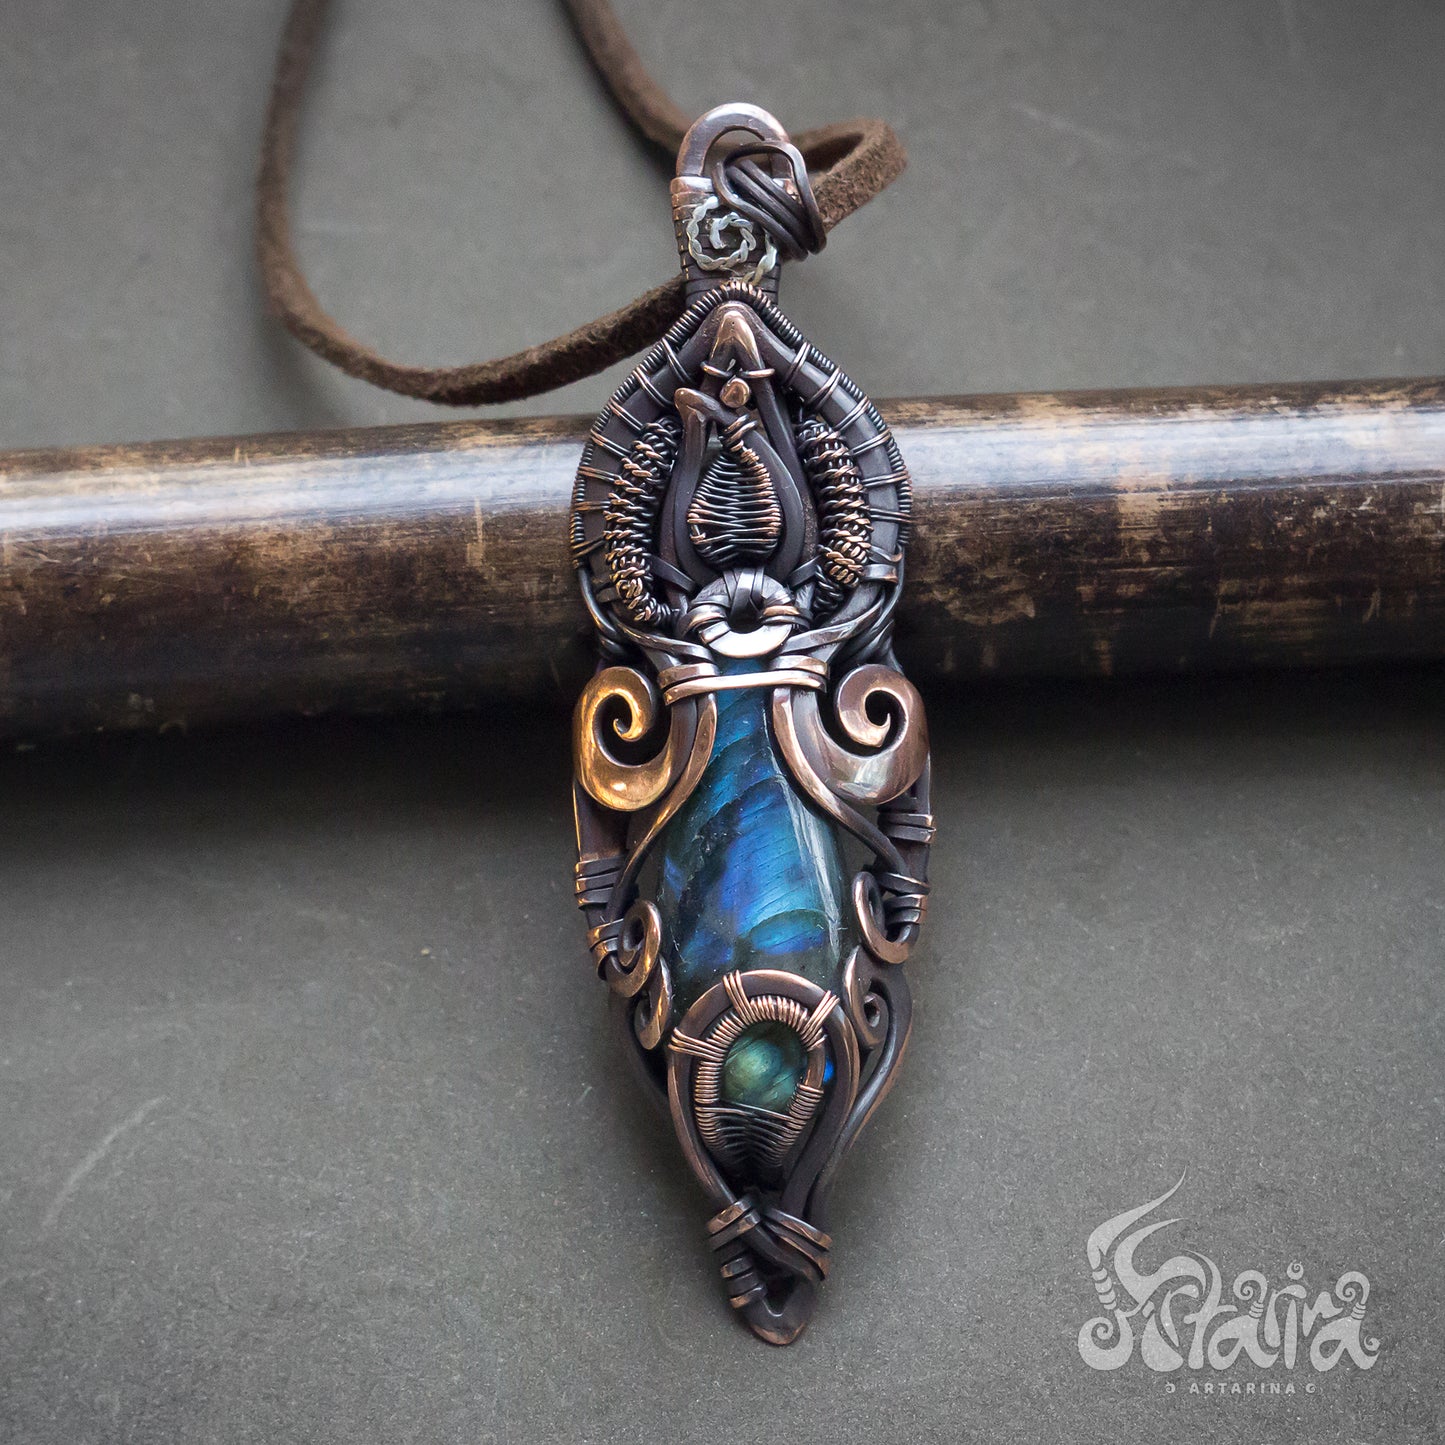 Labradorite wire wrapped necklace Blue stone unique elven jewelry wirewrapped designer natural gemstone necklace Energy spiritual necklace Artarina wirework jewelry pendant made from copper wire Wire weaved heady bold jewelelry bijoux